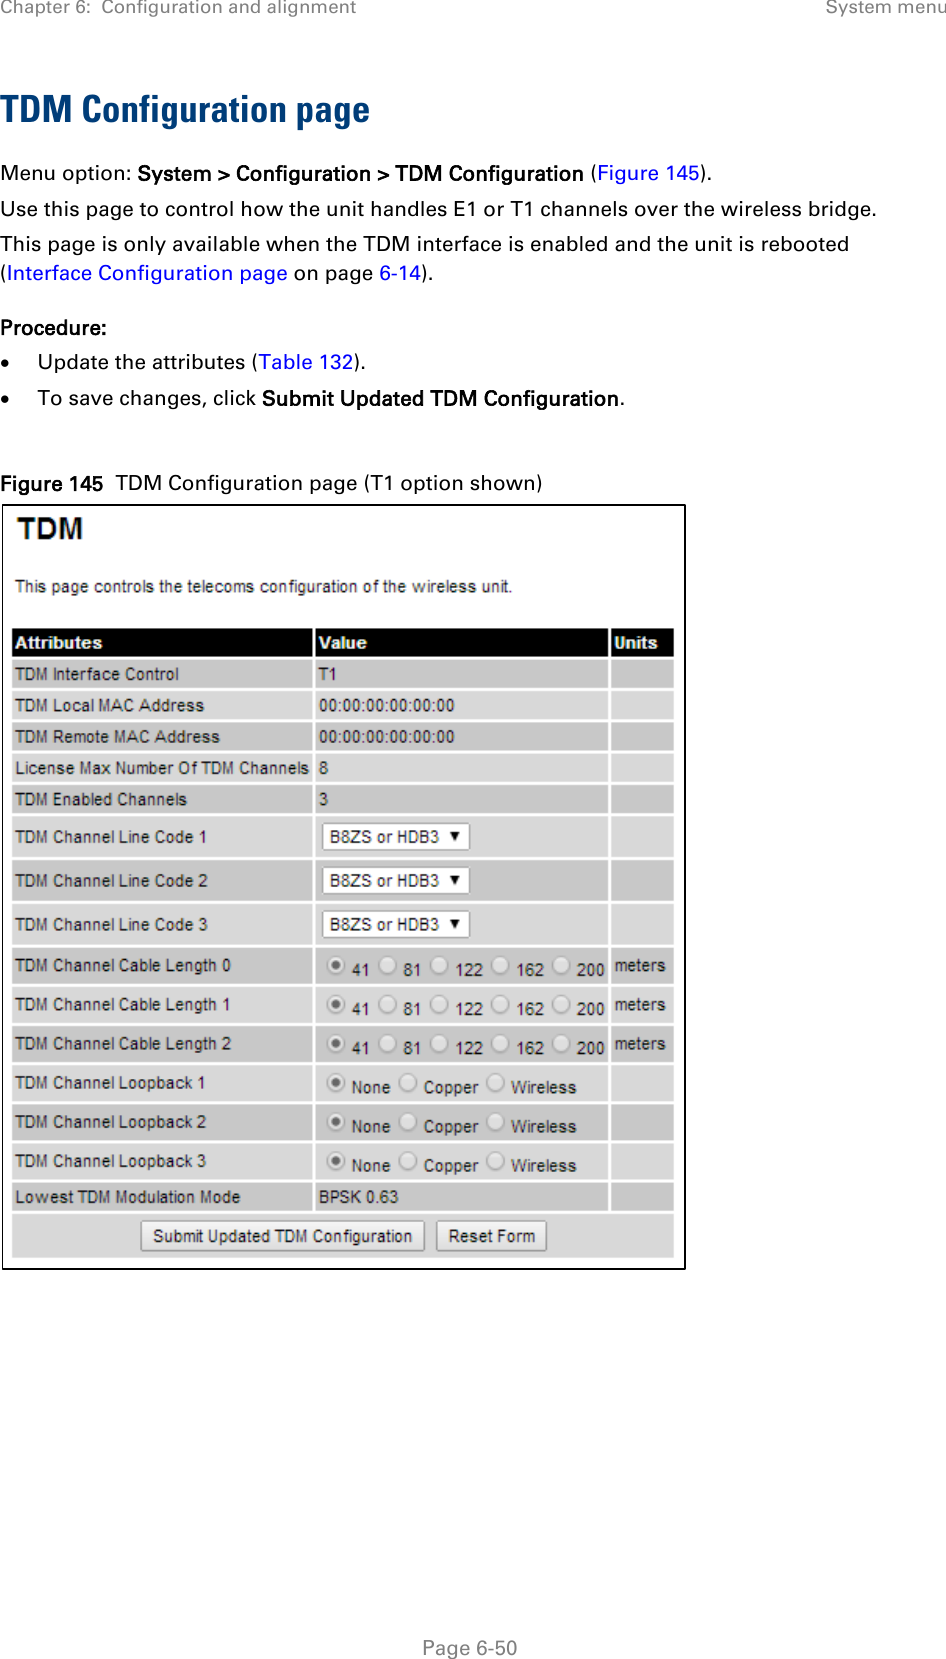 Chapter 6:  Configuration and alignment System menu  TDM Configuration page Menu option: System &gt; Configuration &gt; TDM Configuration (Figure 145). Use this page to control how the unit handles E1 or T1 channels over the wireless bridge. This page is only available when the TDM interface is enabled and the unit is rebooted (Interface Configuration page on page 6-14). Procedure: • Update the attributes (Table 132). • To save changes, click Submit Updated TDM Configuration.  Figure 145  TDM Configuration page (T1 option shown)       Page 6-50 